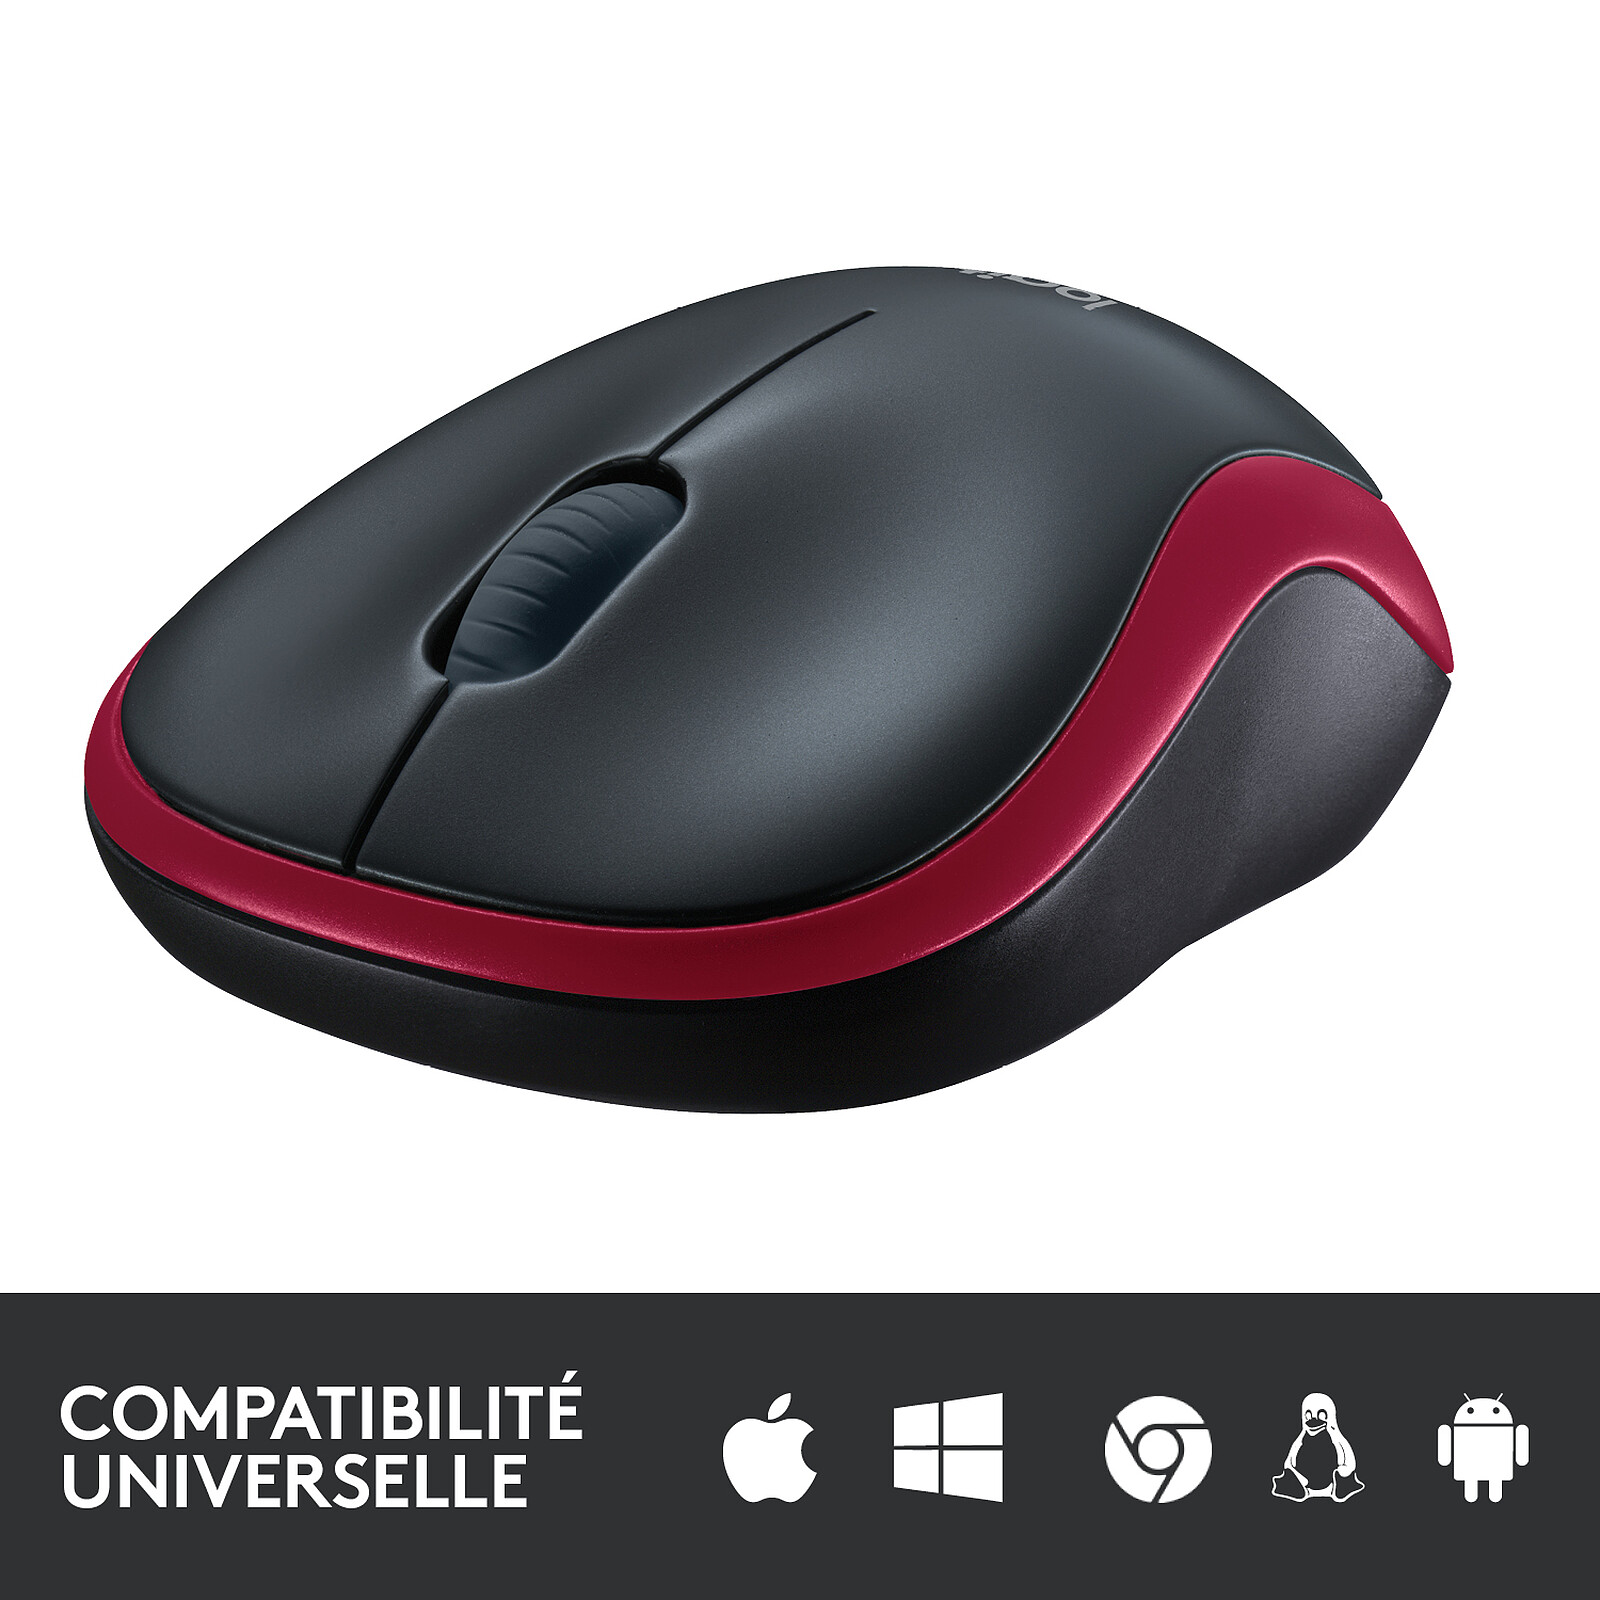 Red MOUSE SENZA FILI WIRELESS USB 2.4ghz Batterie LED per PC red rosso 